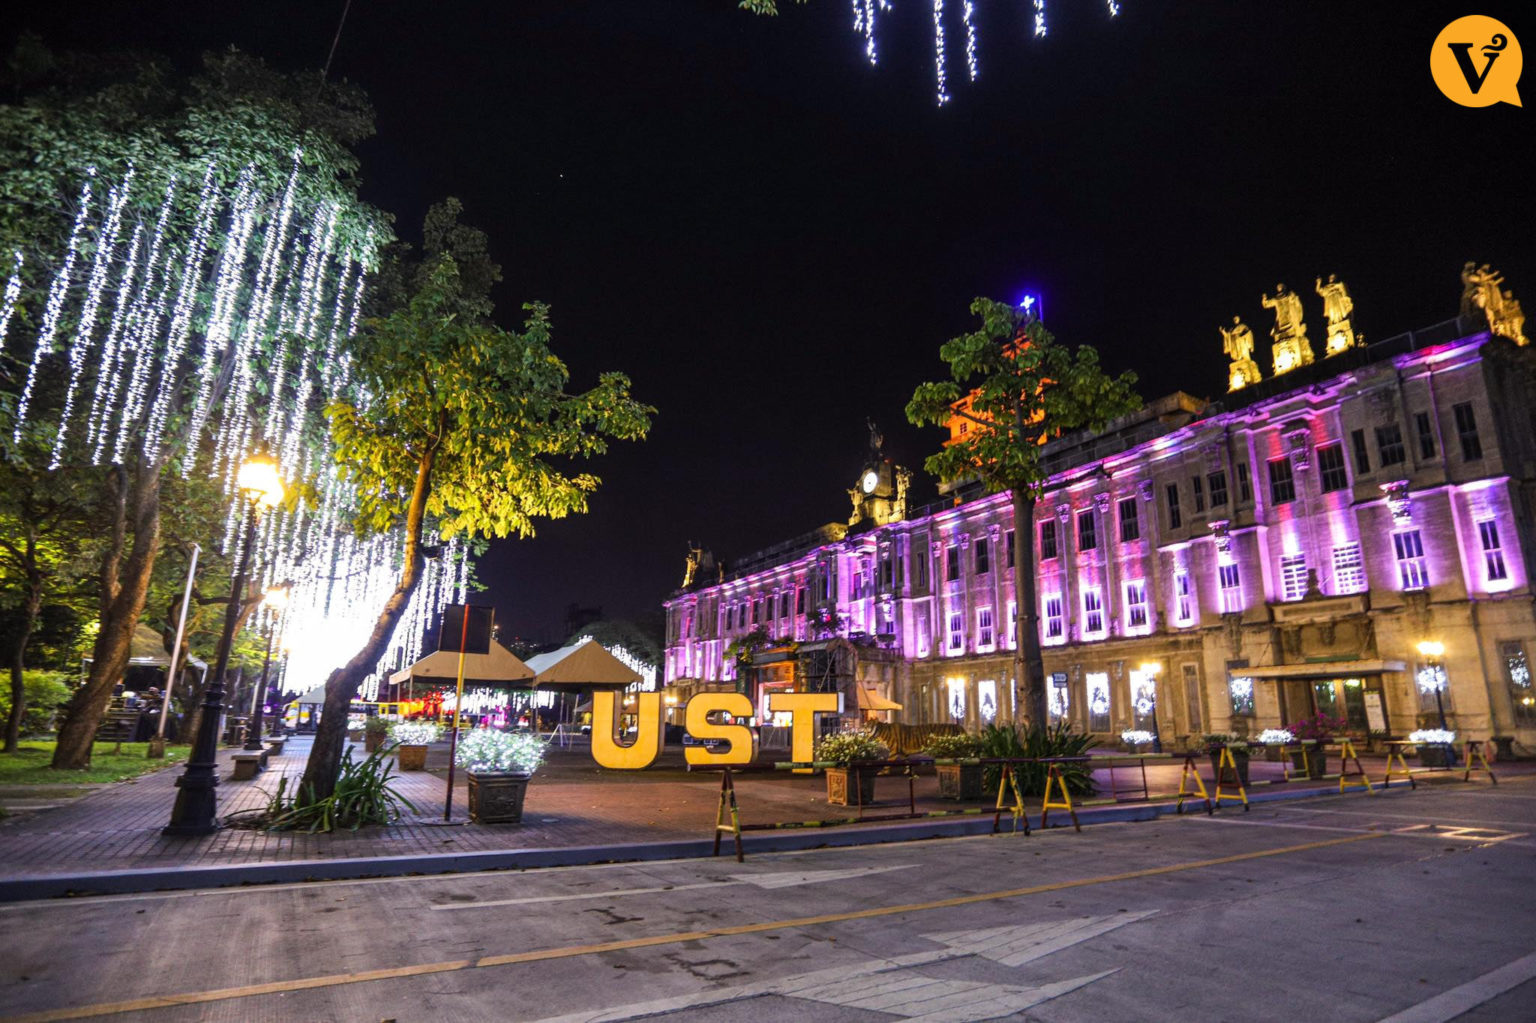 UST is accreditation body’s top university for 11th straight year The